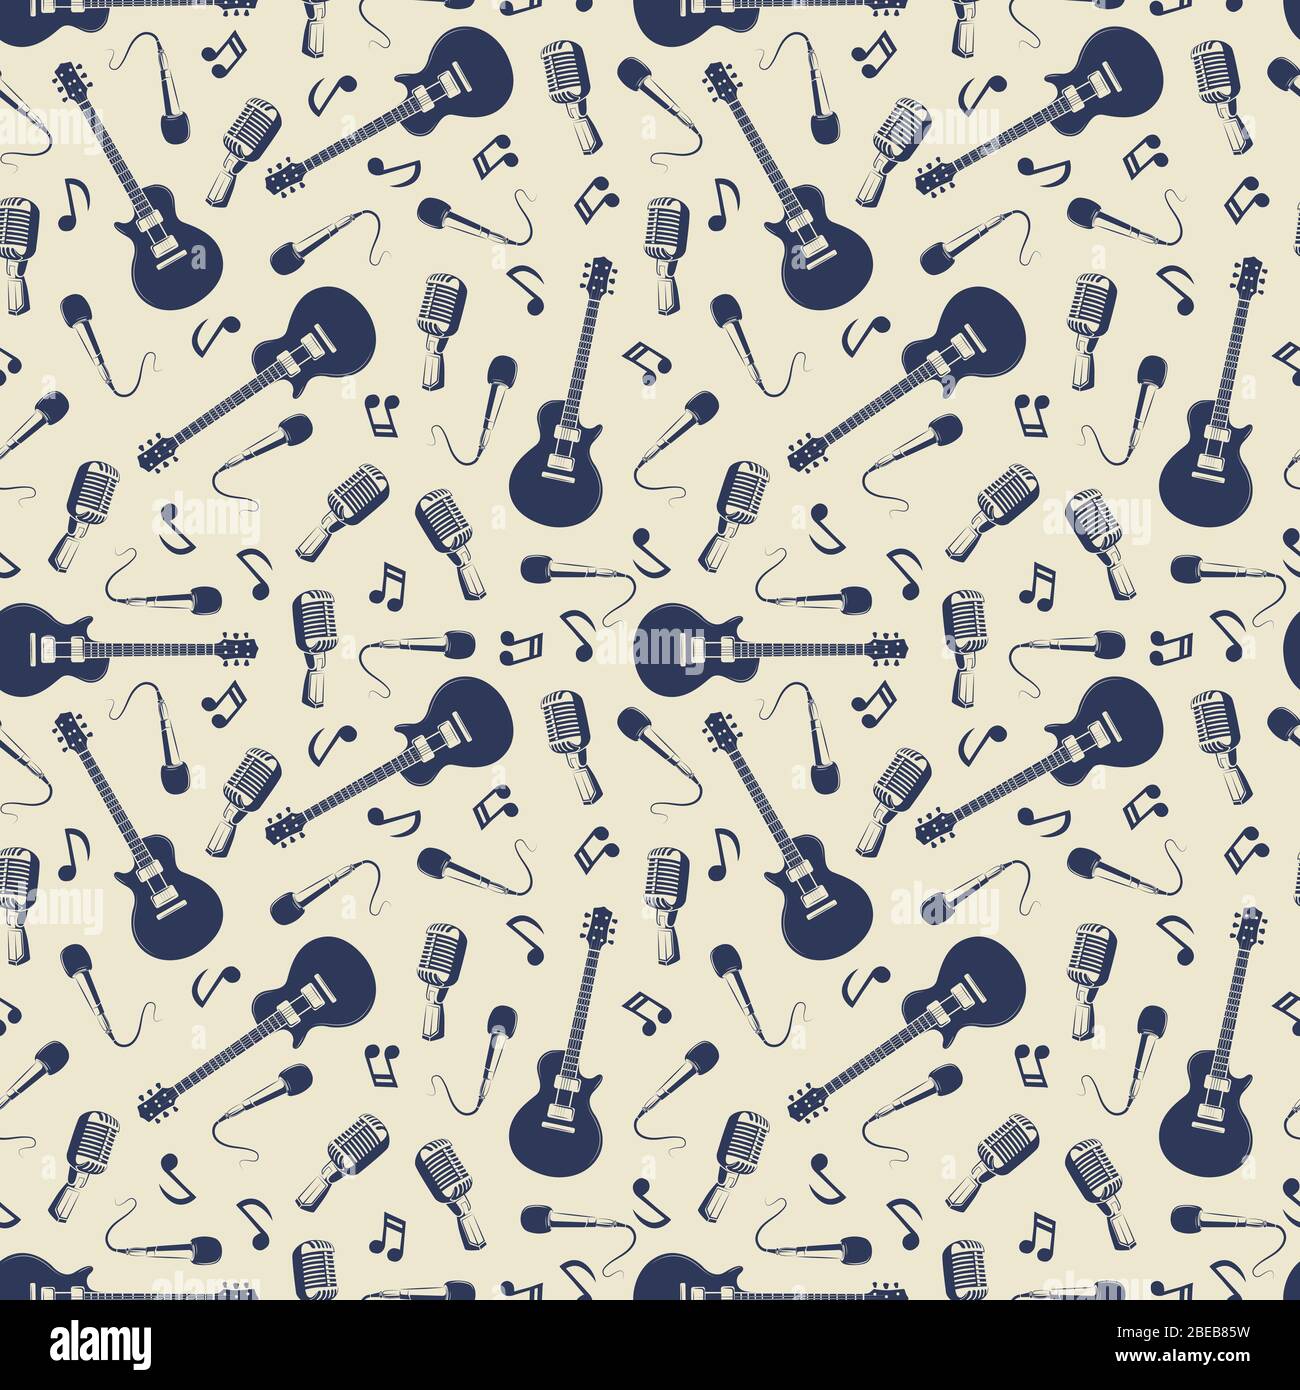 Vintage musical seamless pattern with guitars, microphones and music notes. Vector illustration Stock Vector